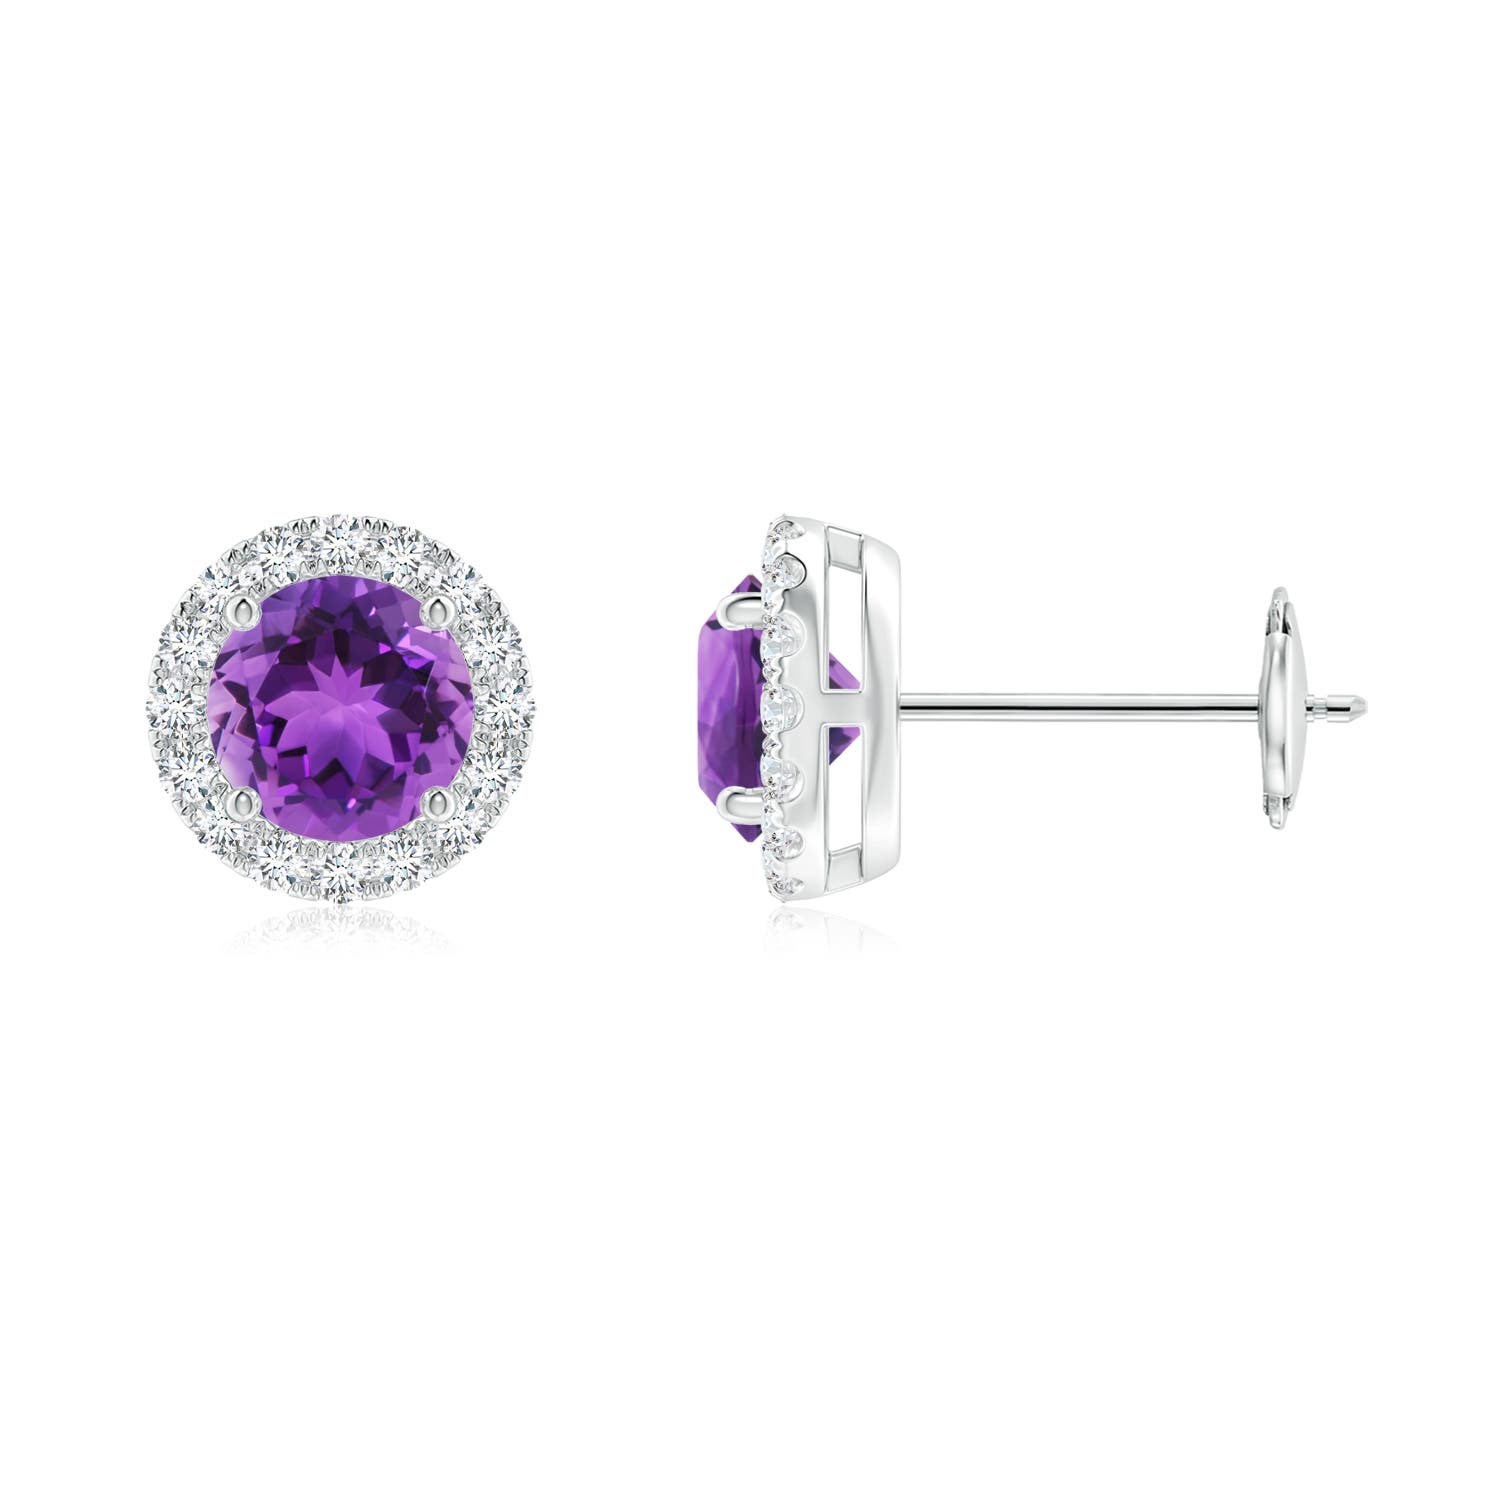 AAA - Amethyst / 1.16 CT / 14 KT White Gold